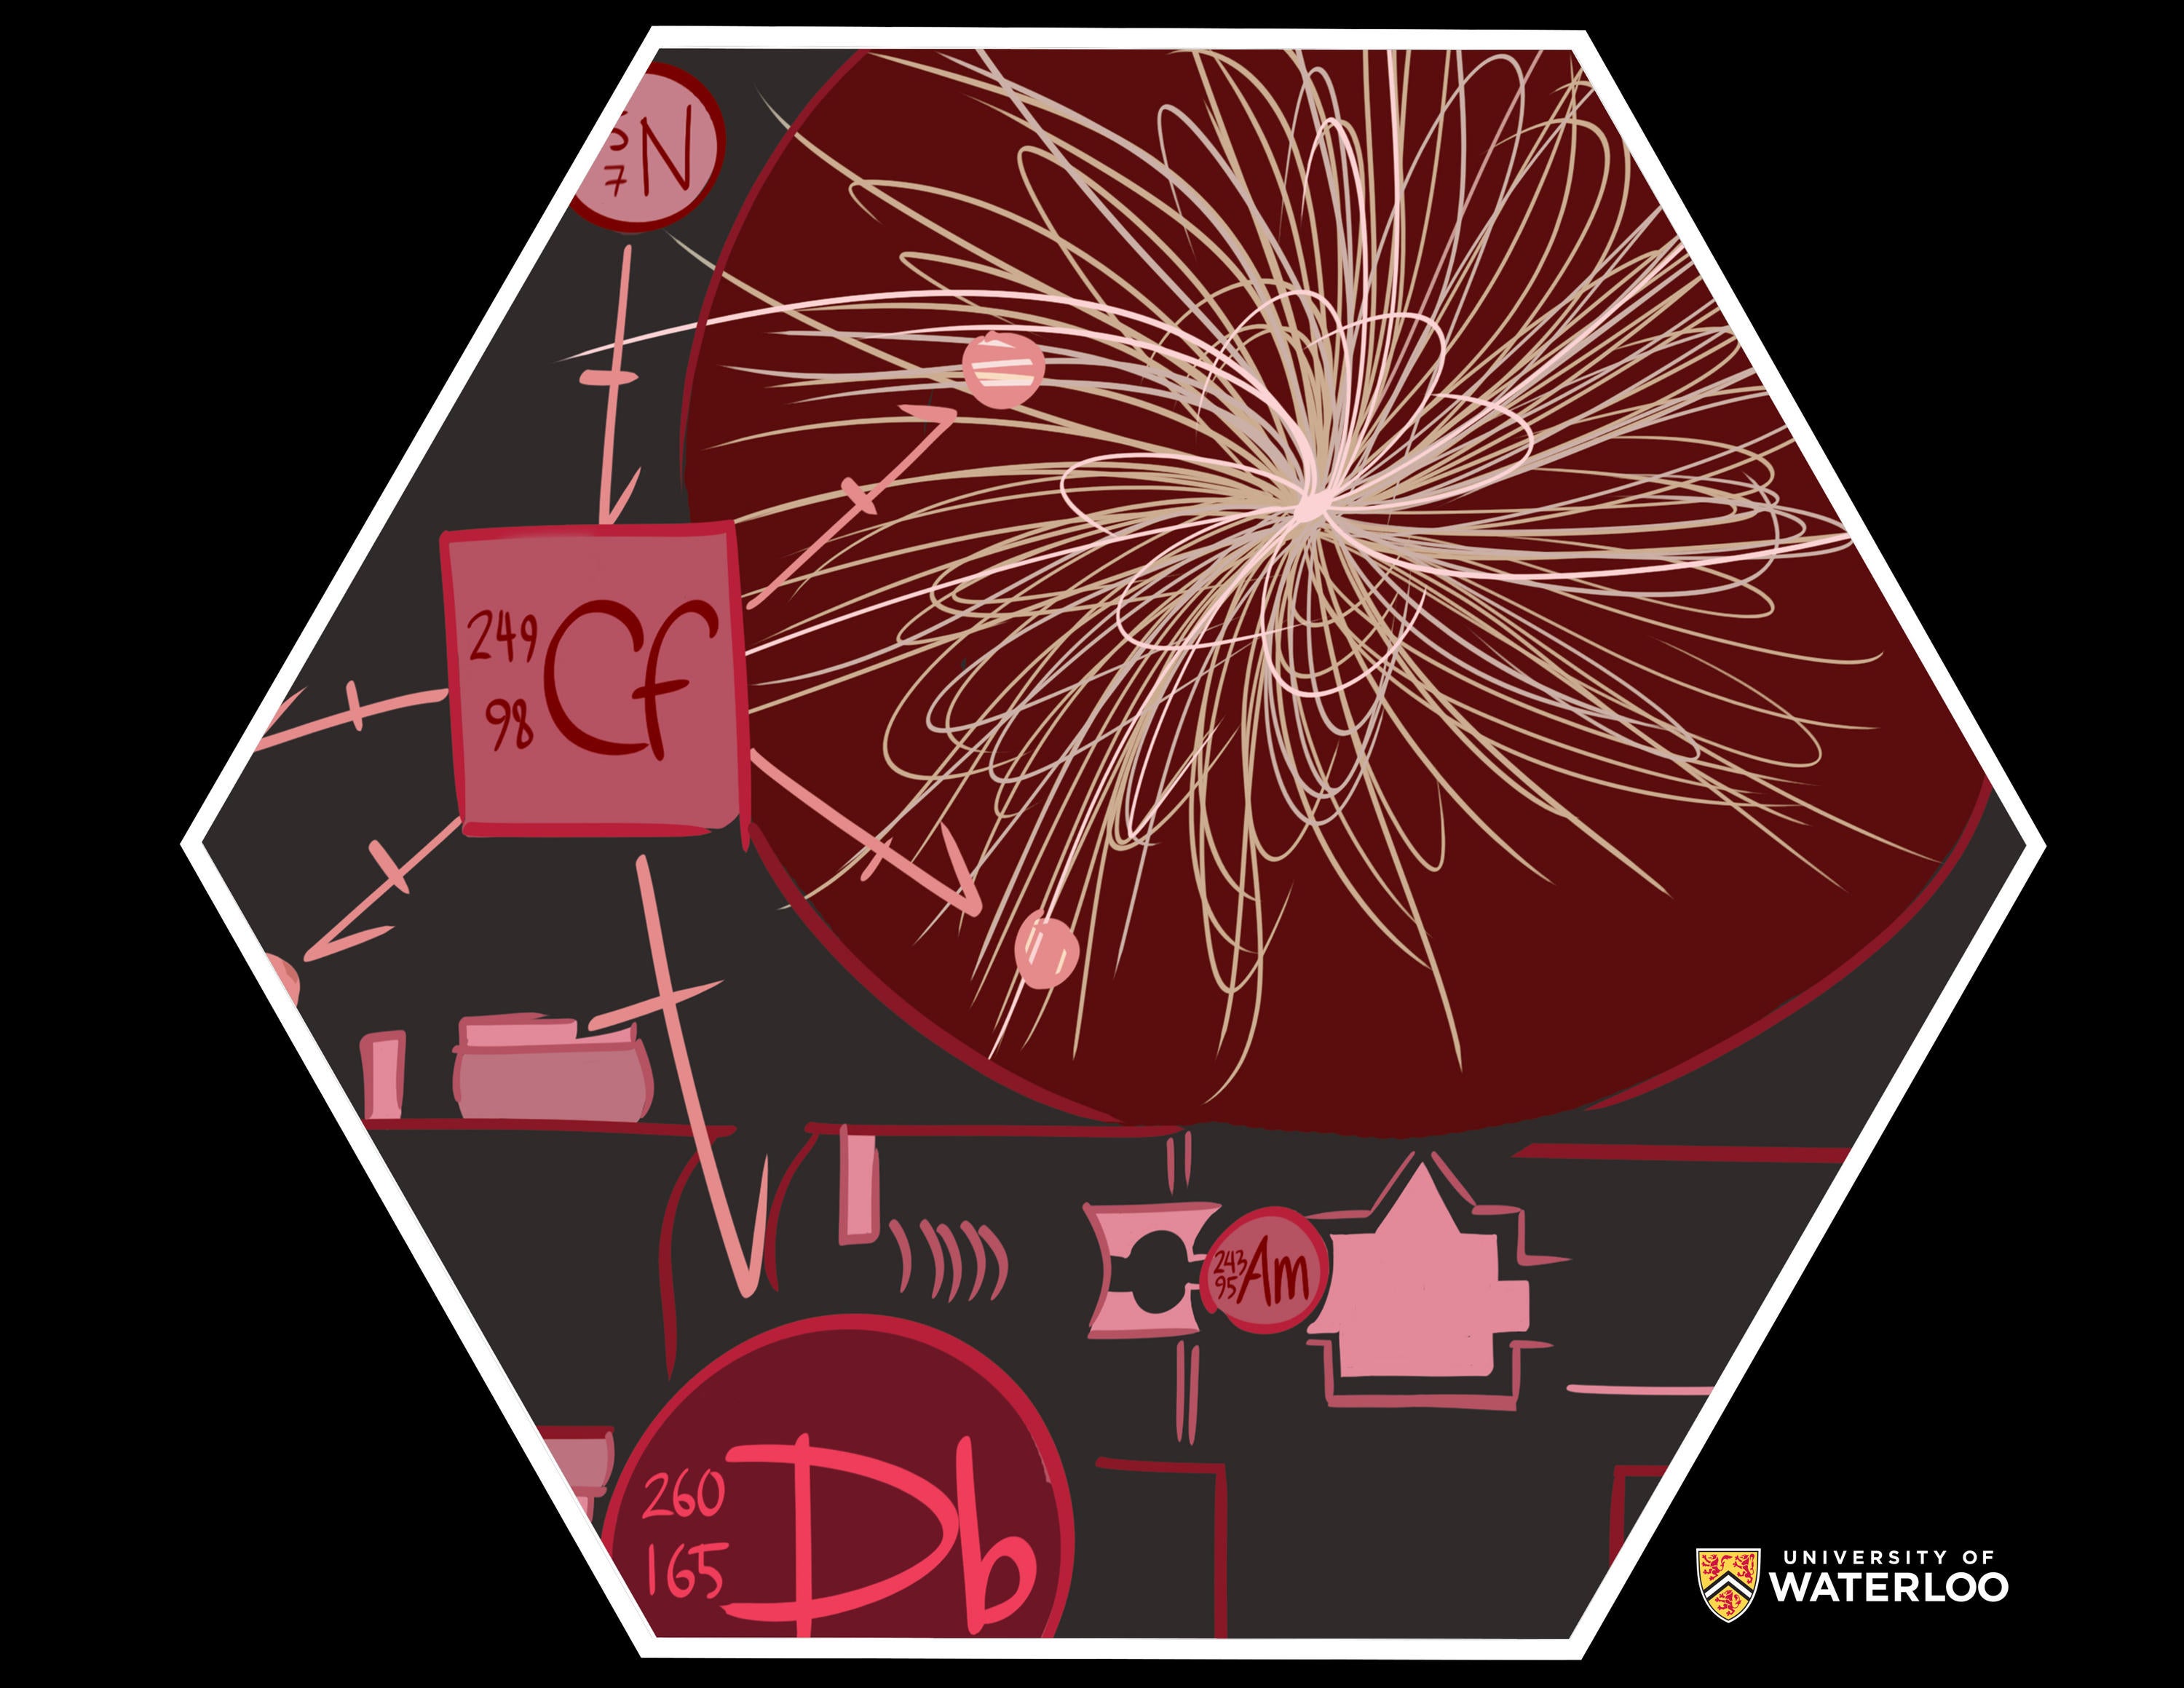 Digital composite in reds and pinks on a black background. In the foreground “N-15” collides with “Cf-249” to create “Db-105”, releasing four neutrons. In the background, a second experimental design with nuclear fission in one chamber.